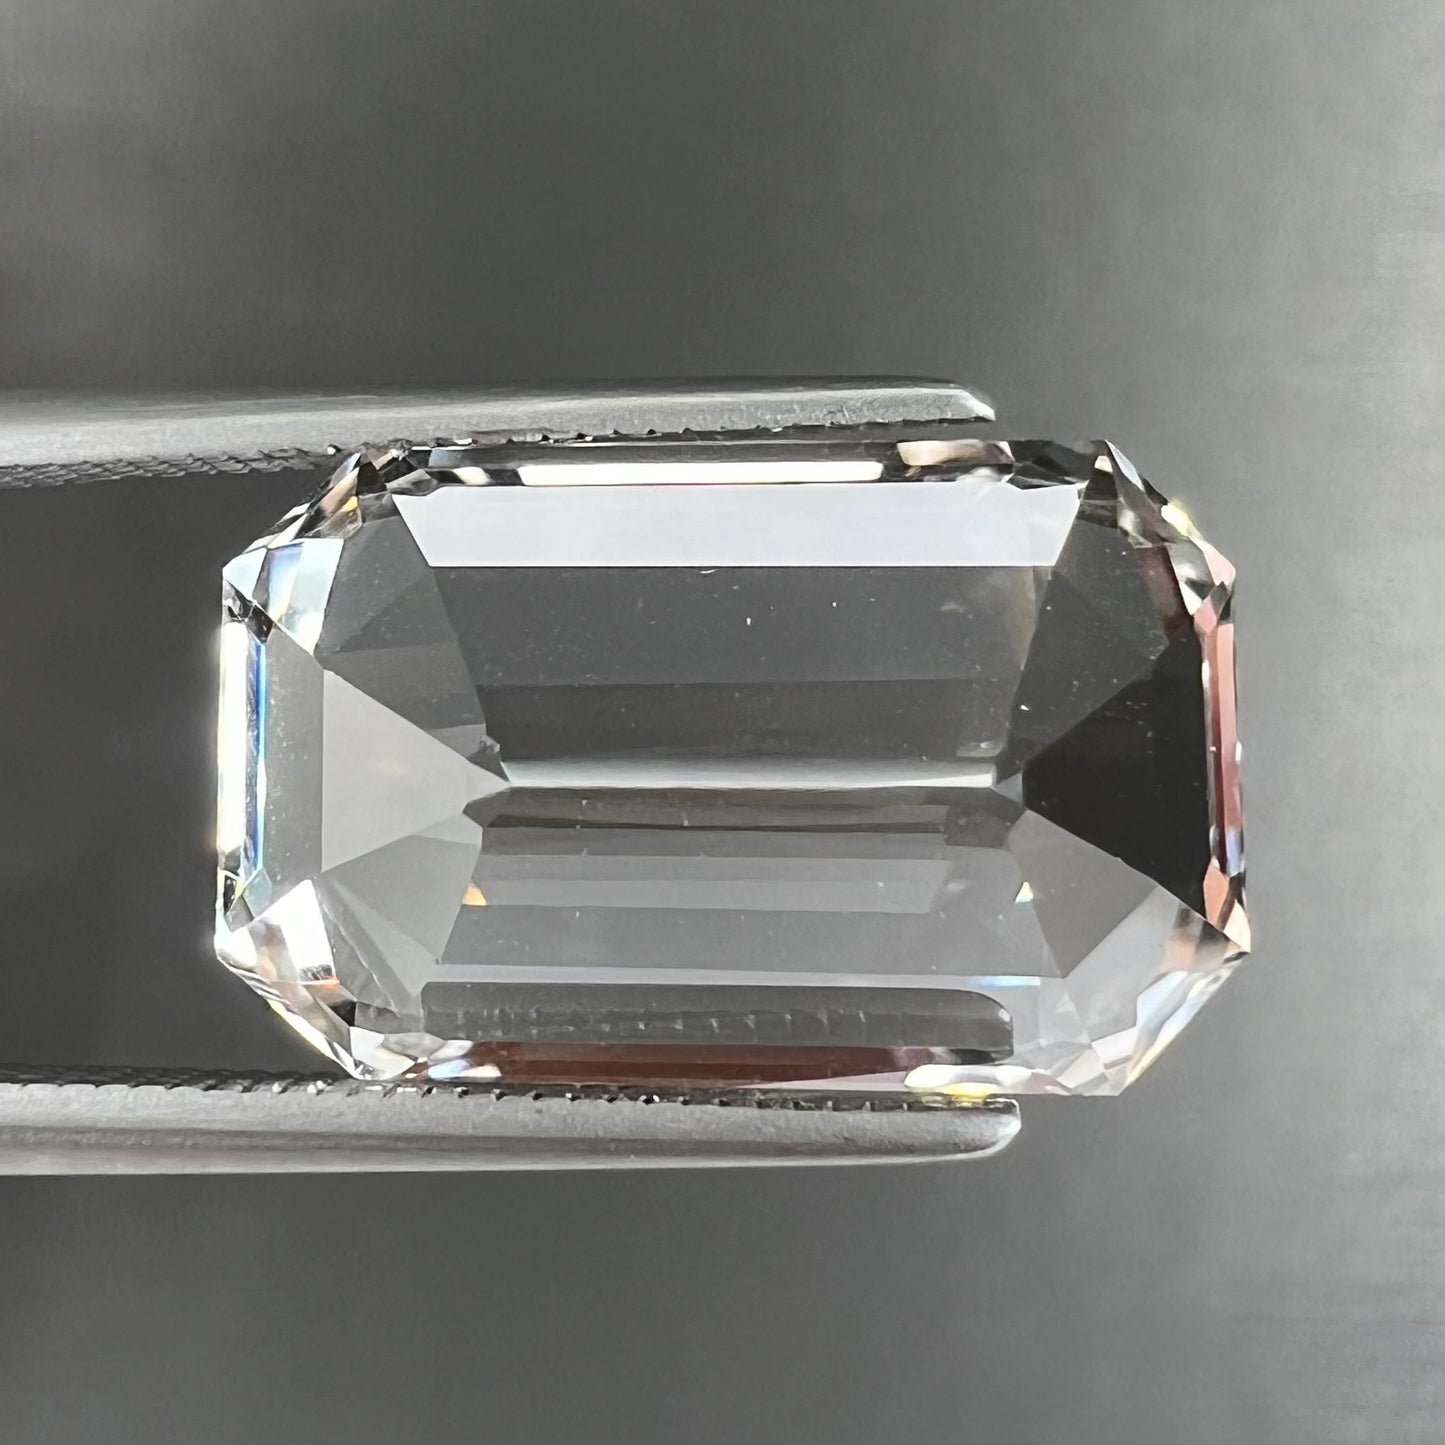 A loose, emerald cut topaz gemstone from Russia.  The stone is a faint pinkish white color.